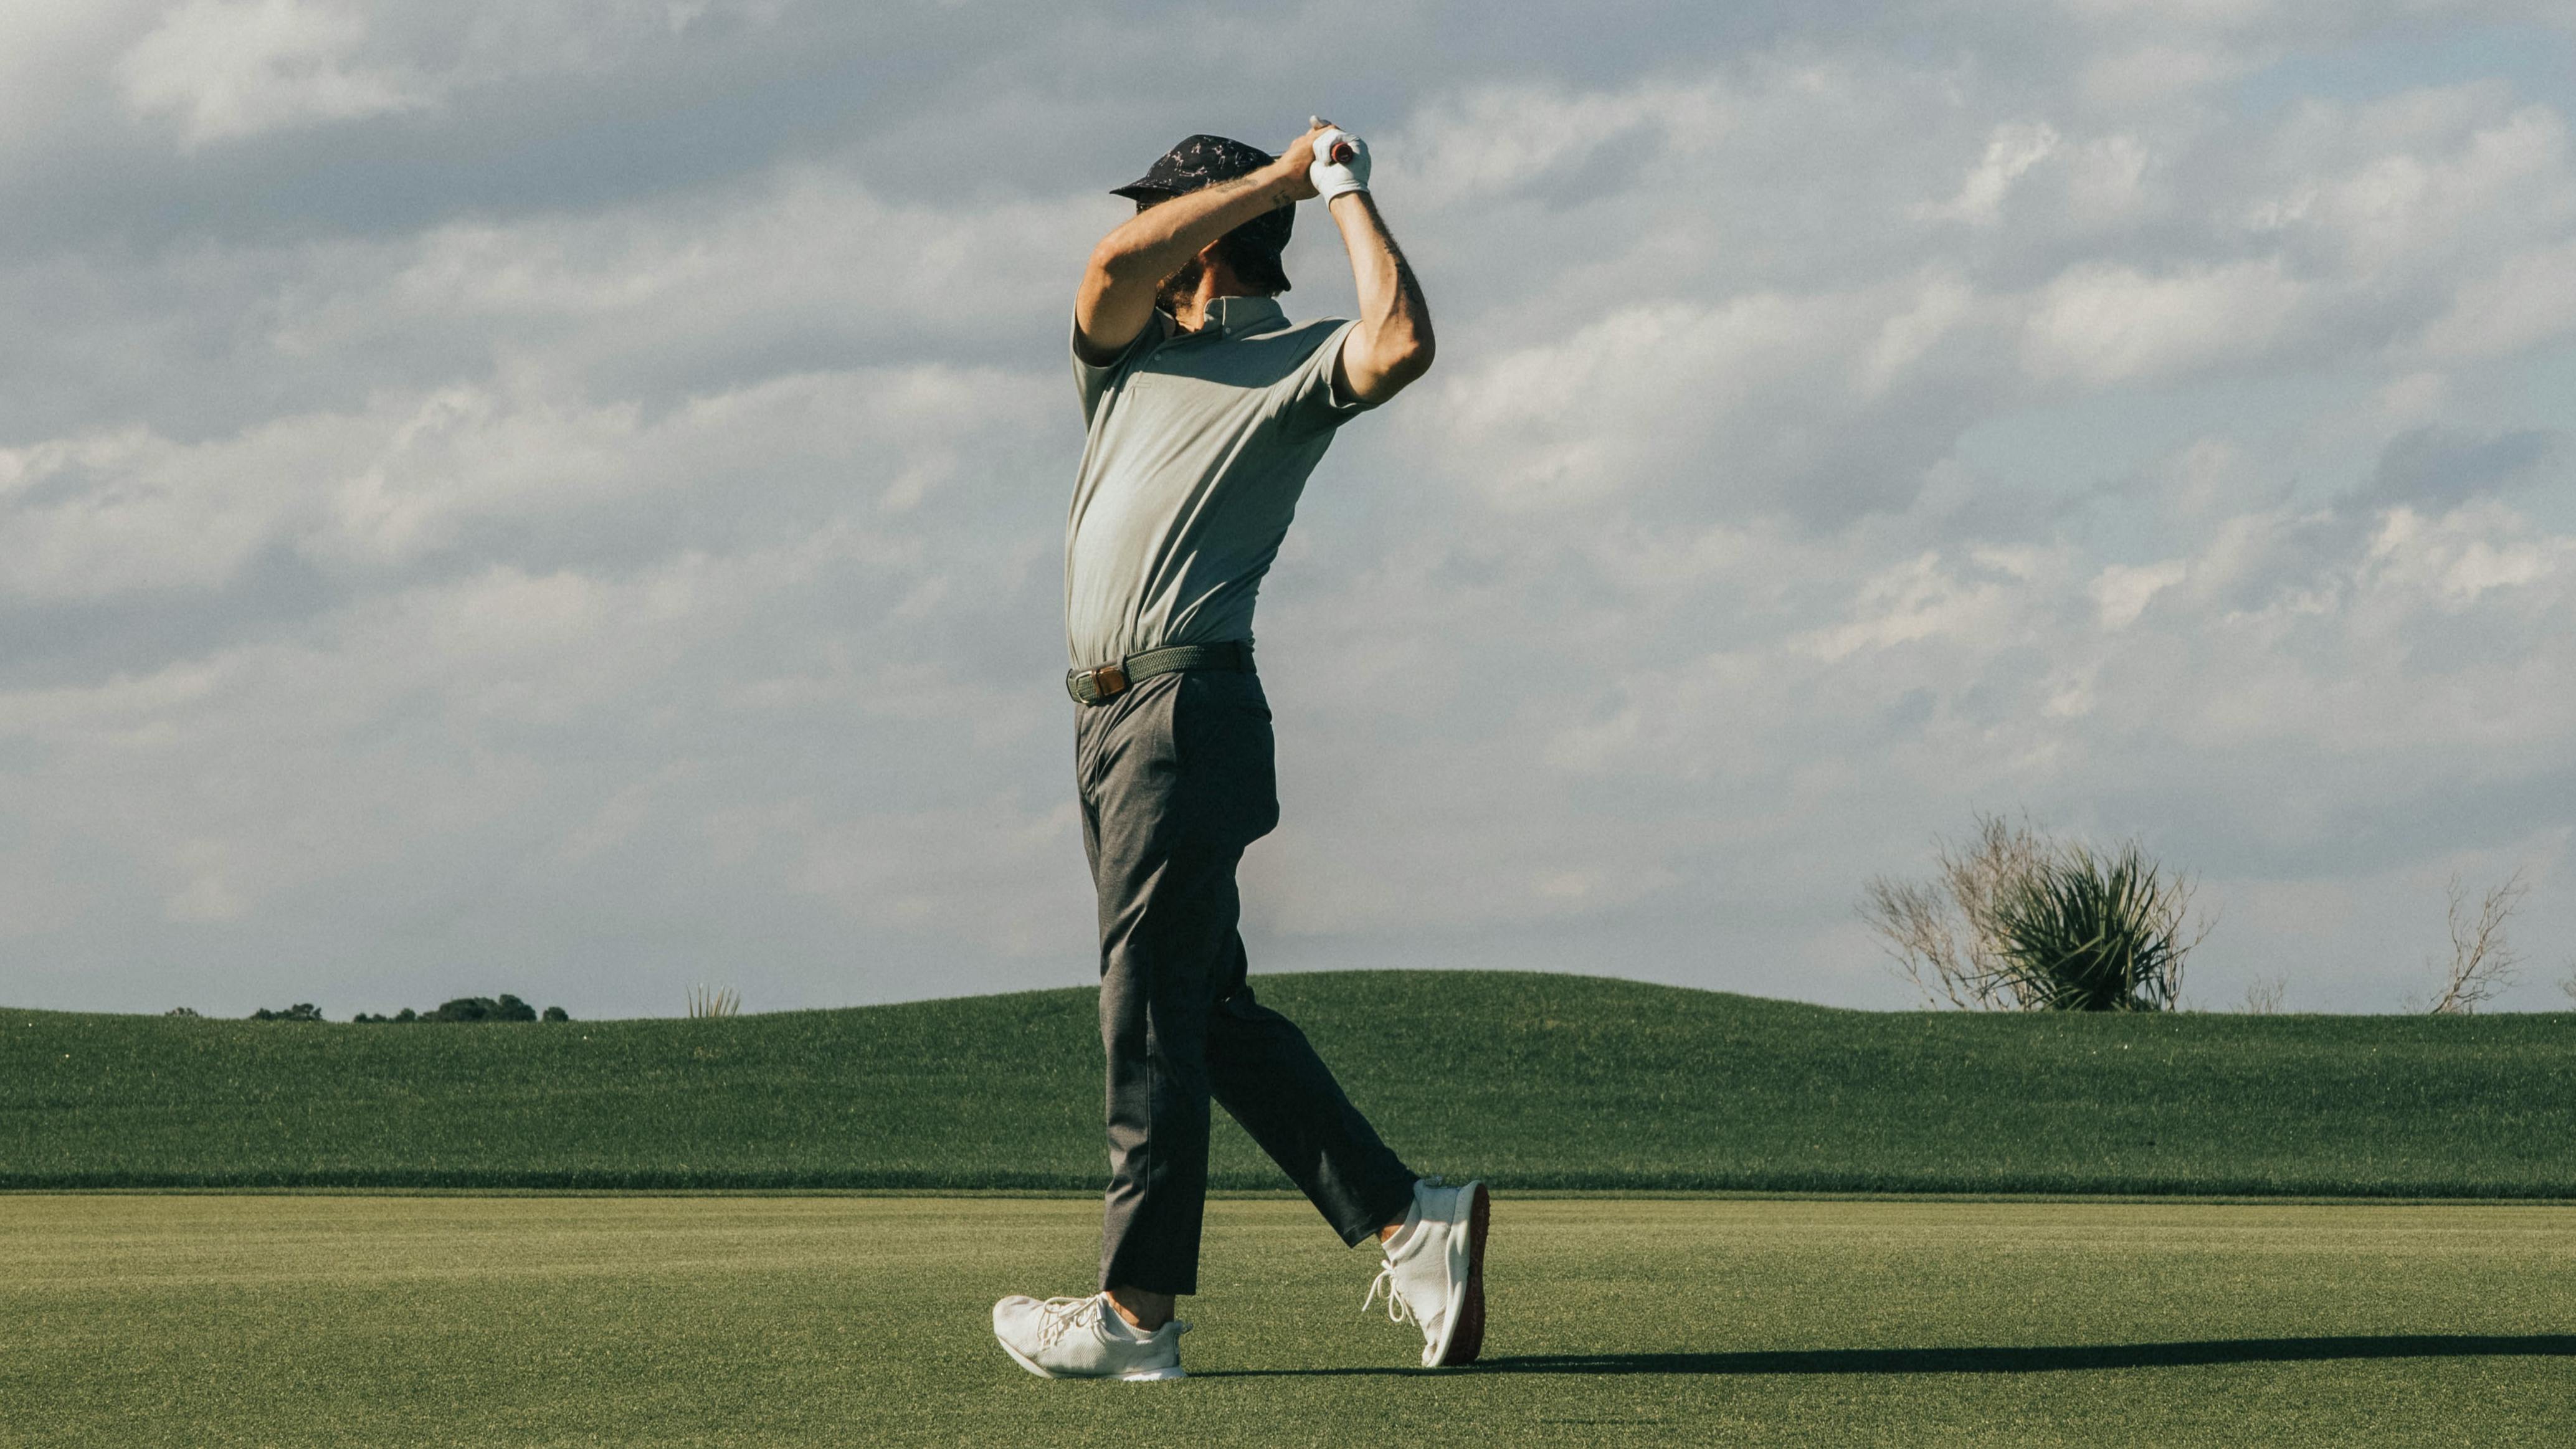 A man stands perpendicular to the camera and swings his golf club back, his arms obscuring his face.